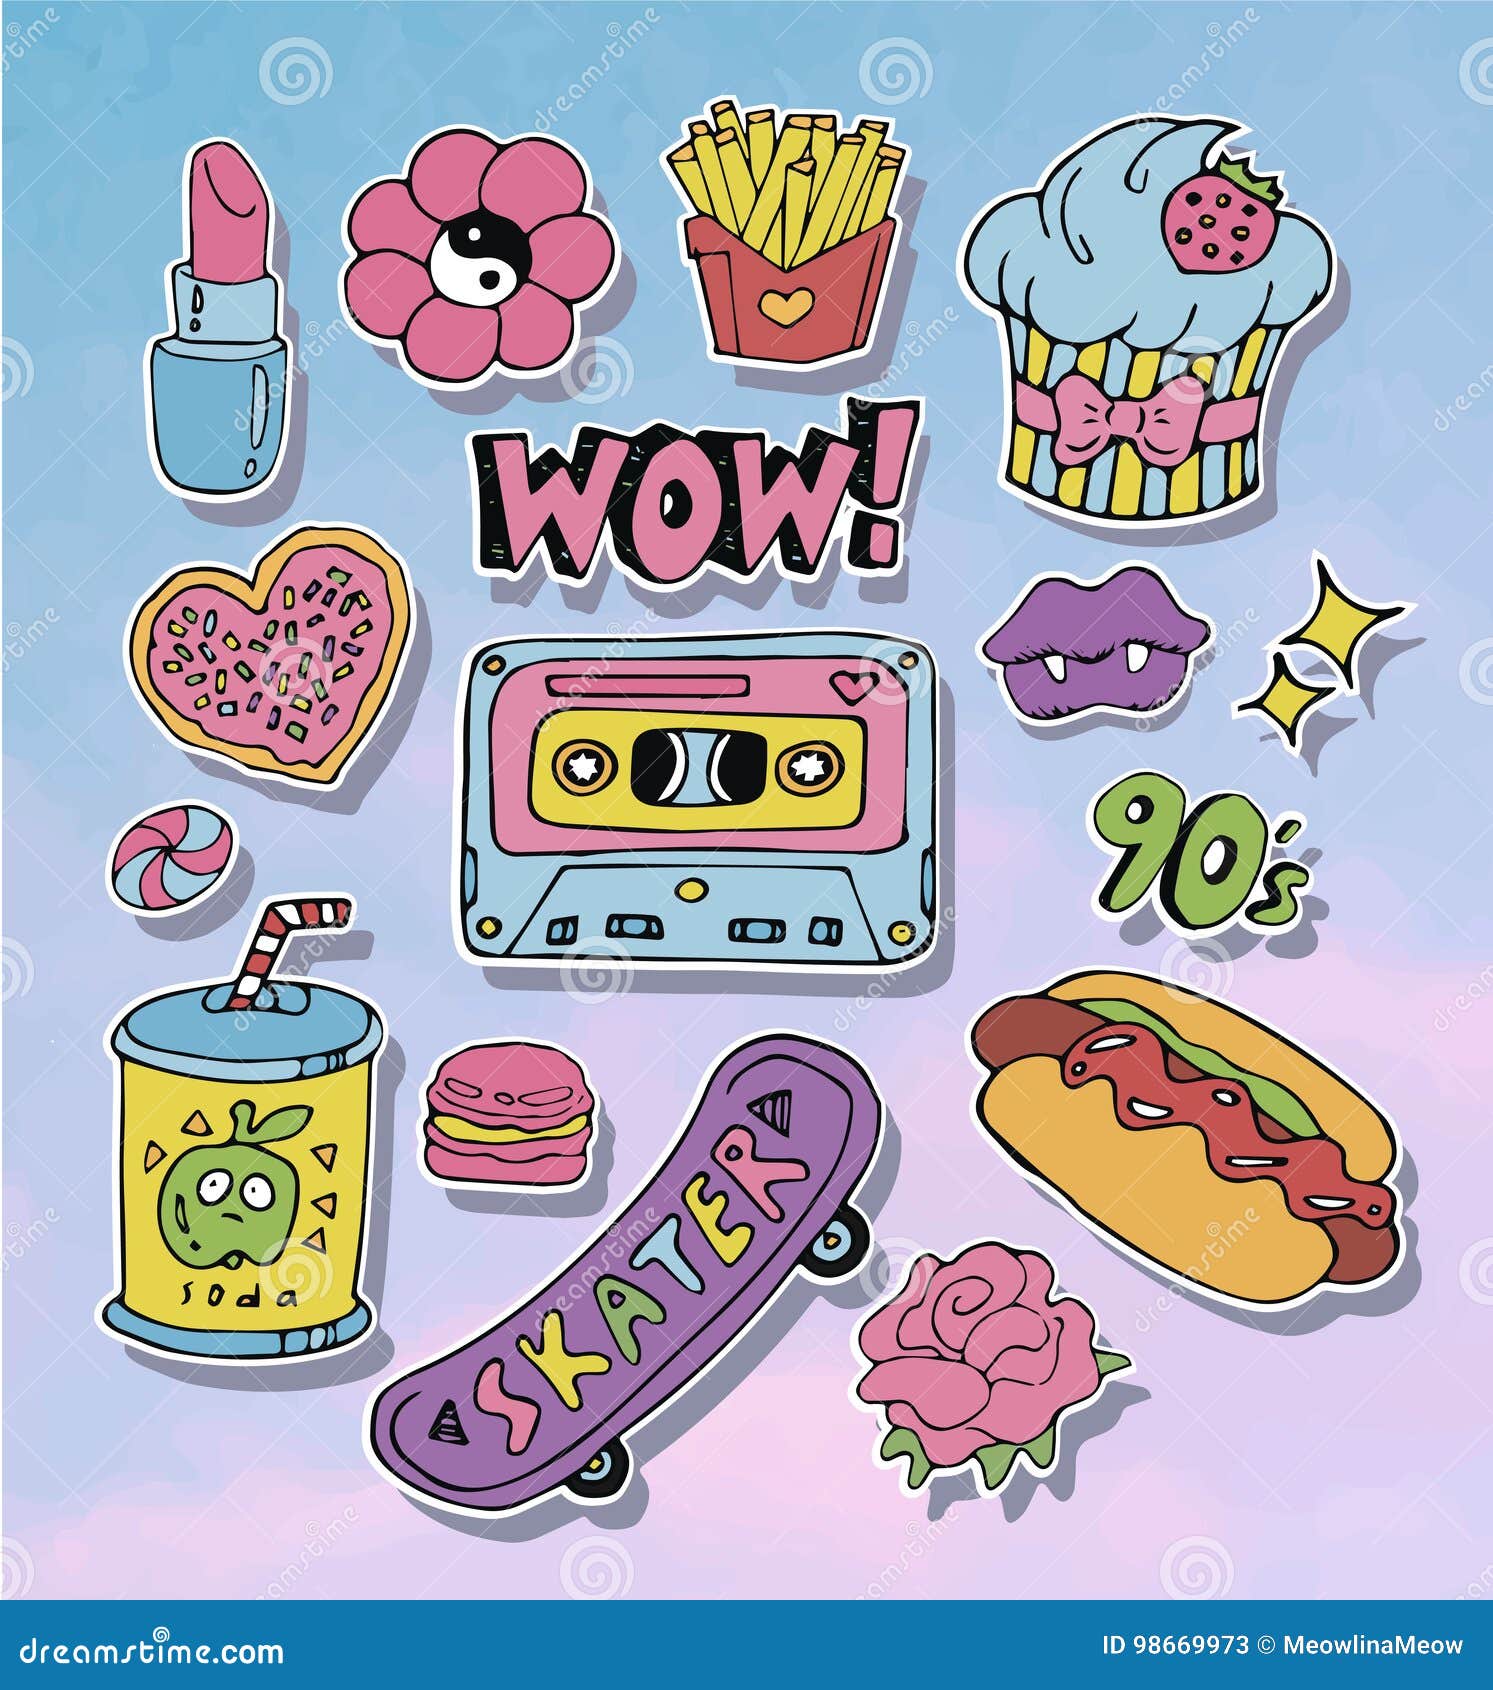 Cartoon Stickers or Patches Set with 90s Style Design Elements